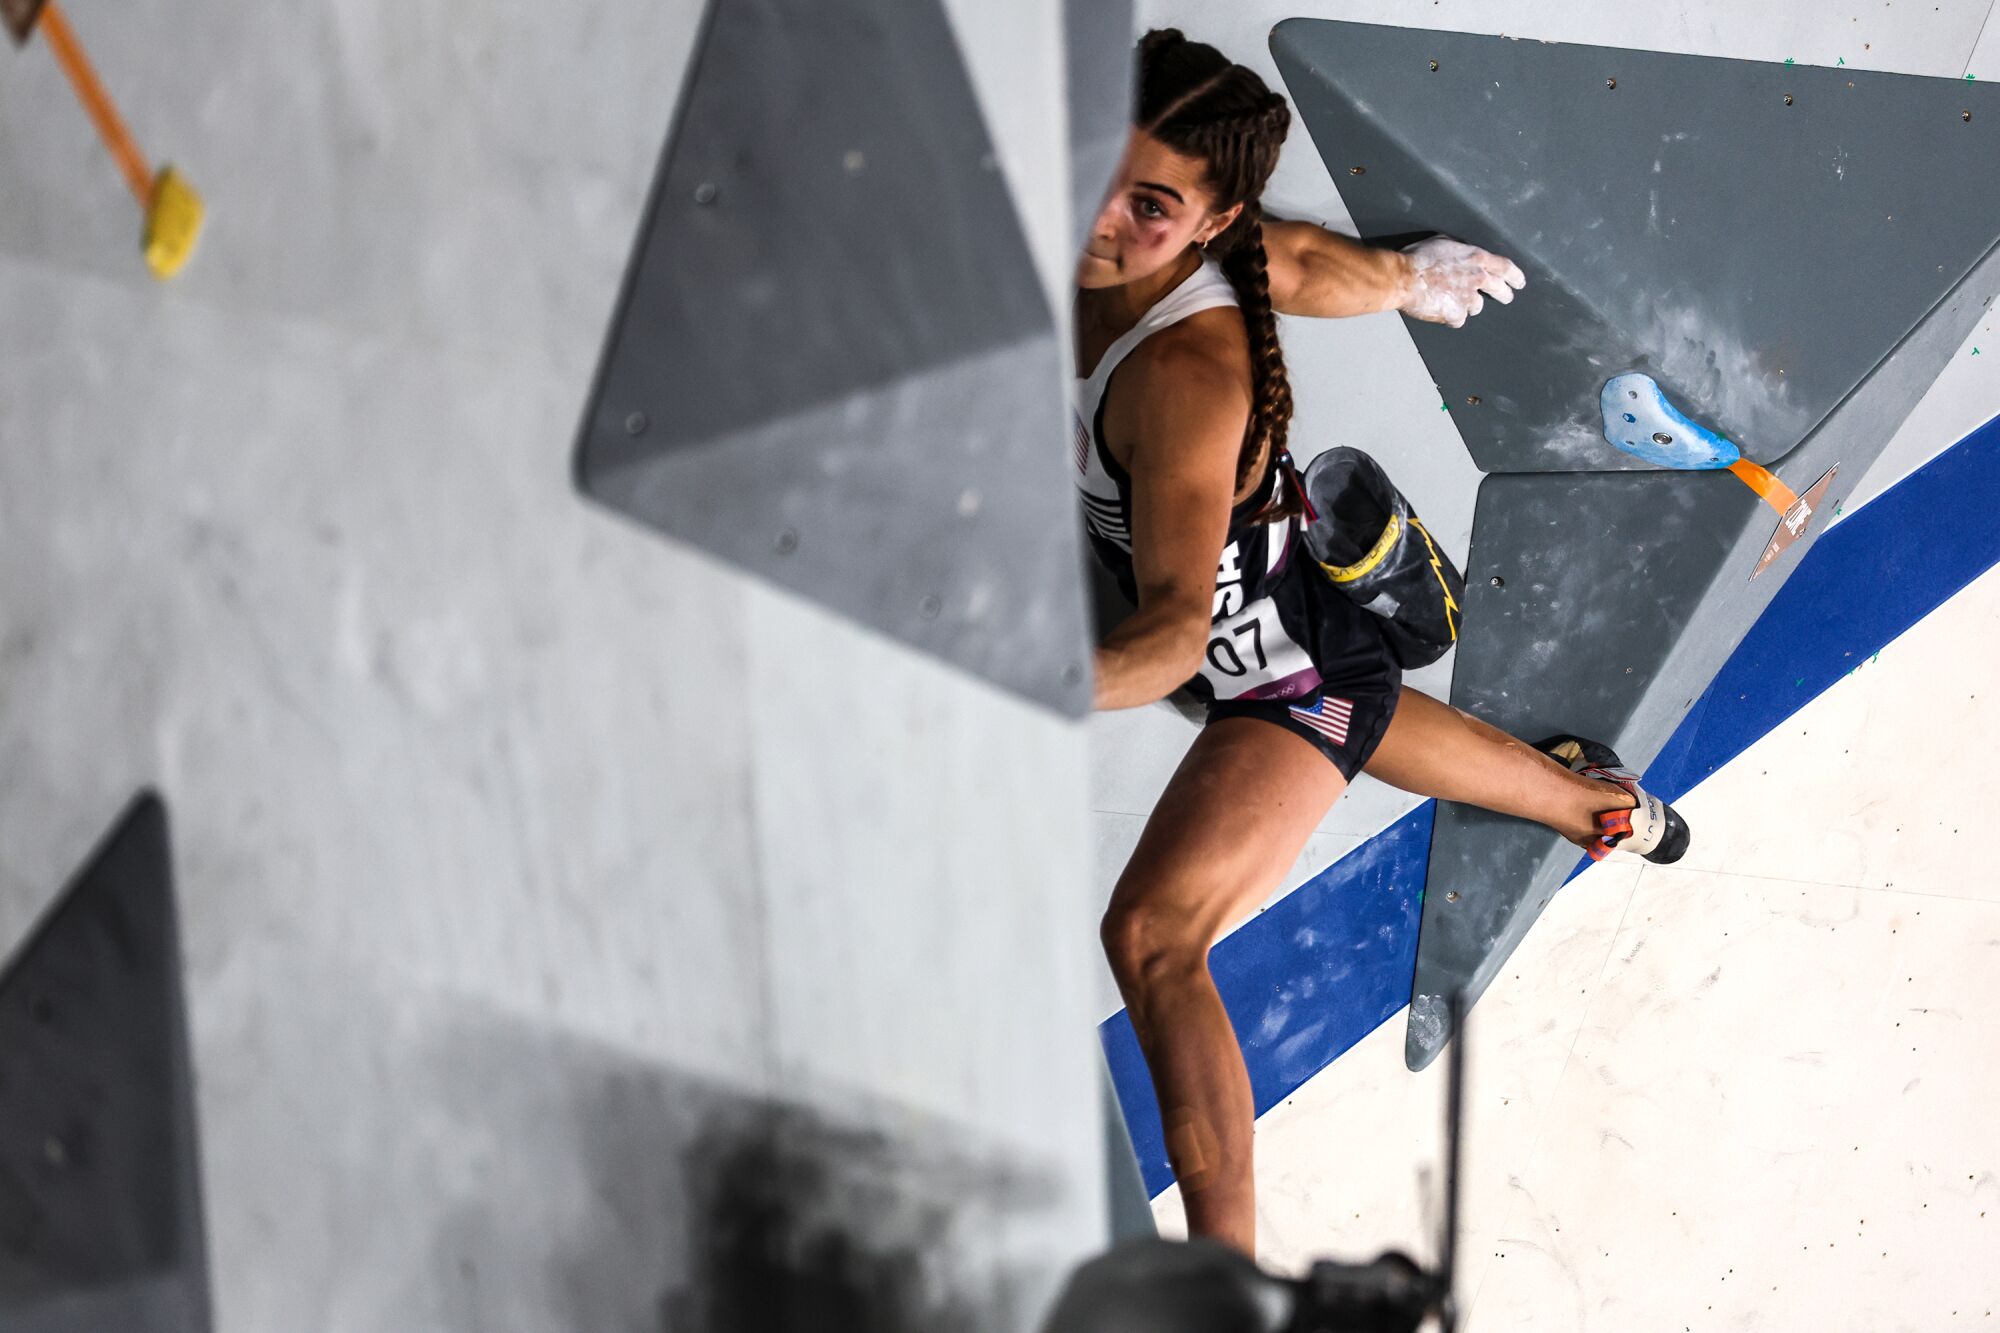 USA climber Brooke Raboutou competes in the bouldering final at the Tokyo Olympics